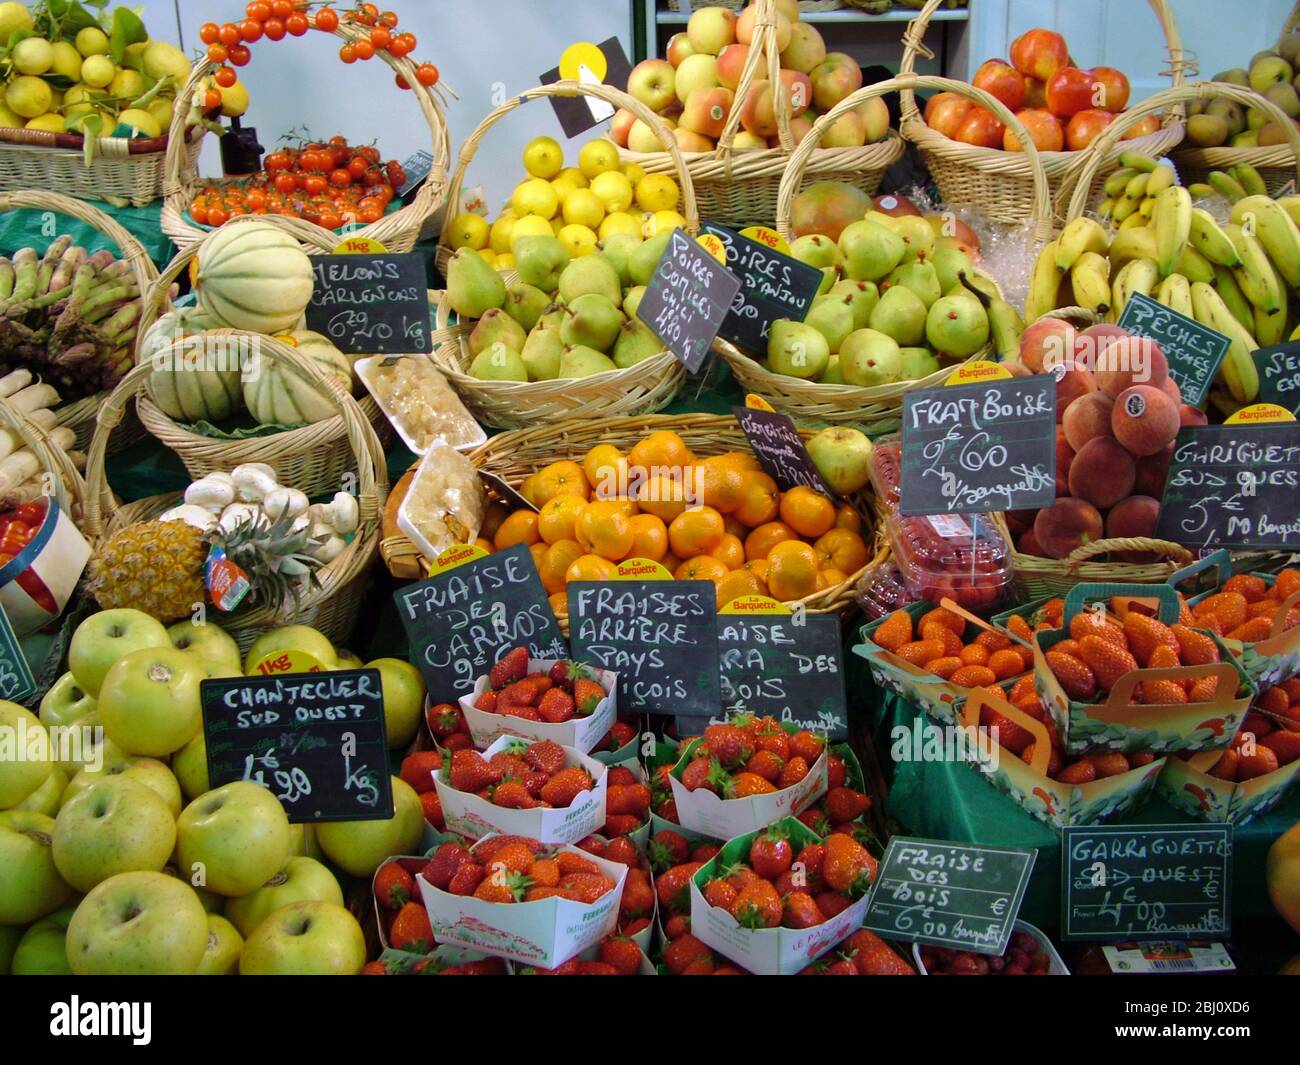 Wonderful display of fresh fruits at stall in covered market in Menton, south of France - Stock Photo